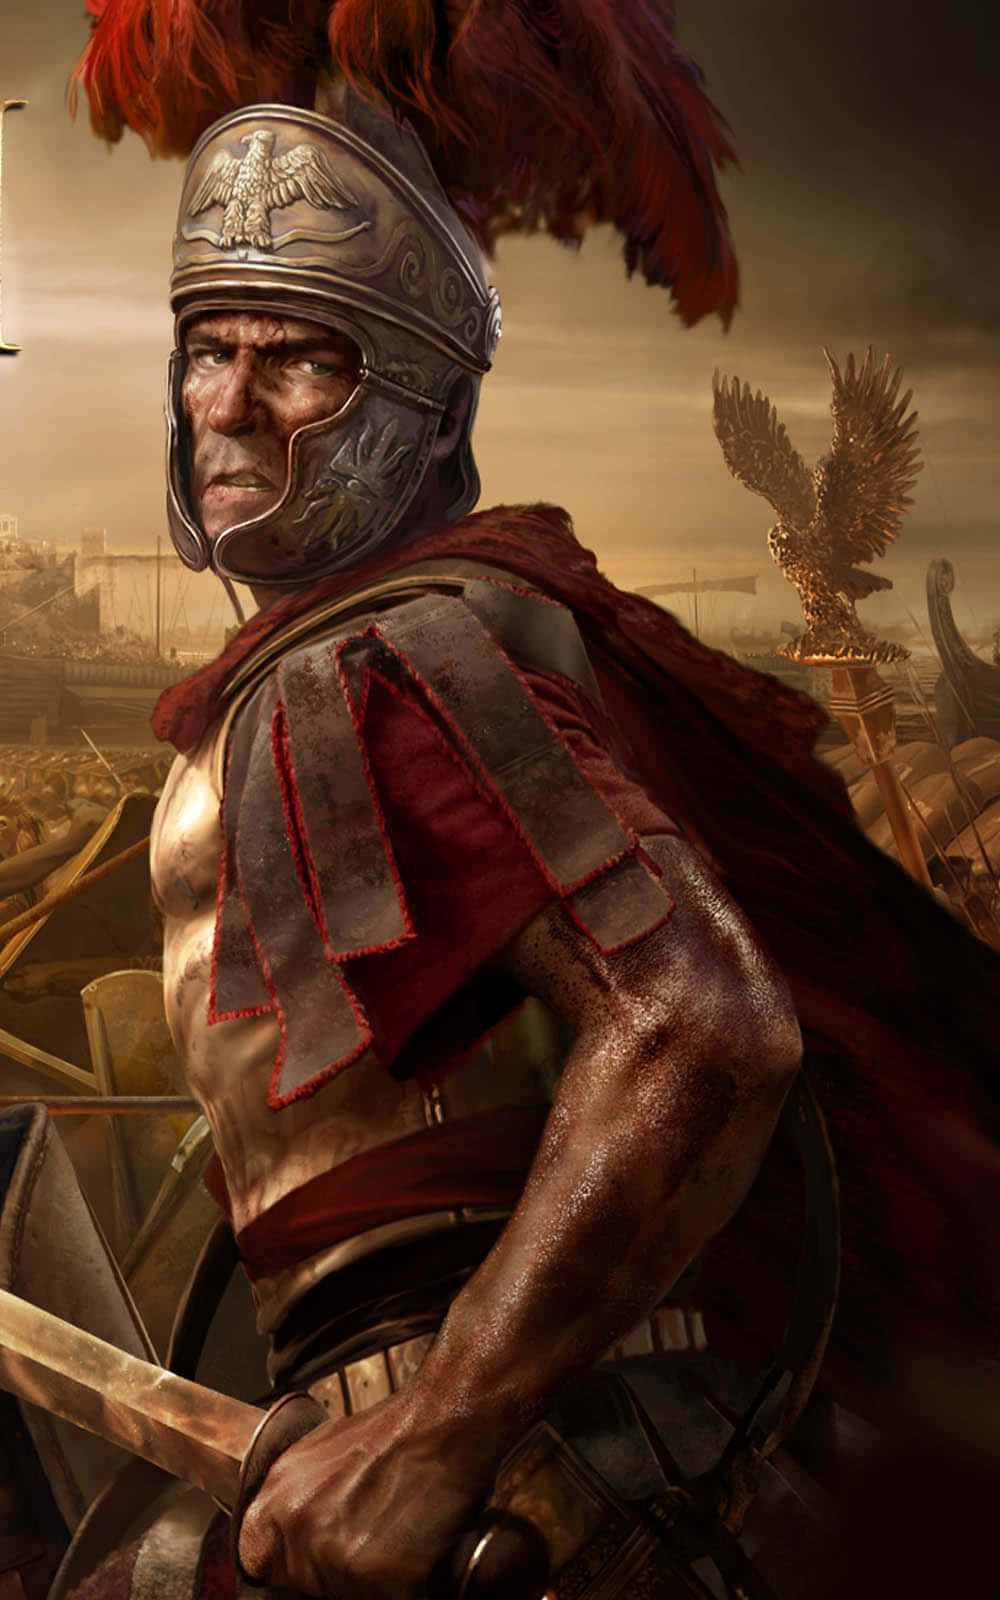 Stunning Artwork from Total War: Rome 2 Game